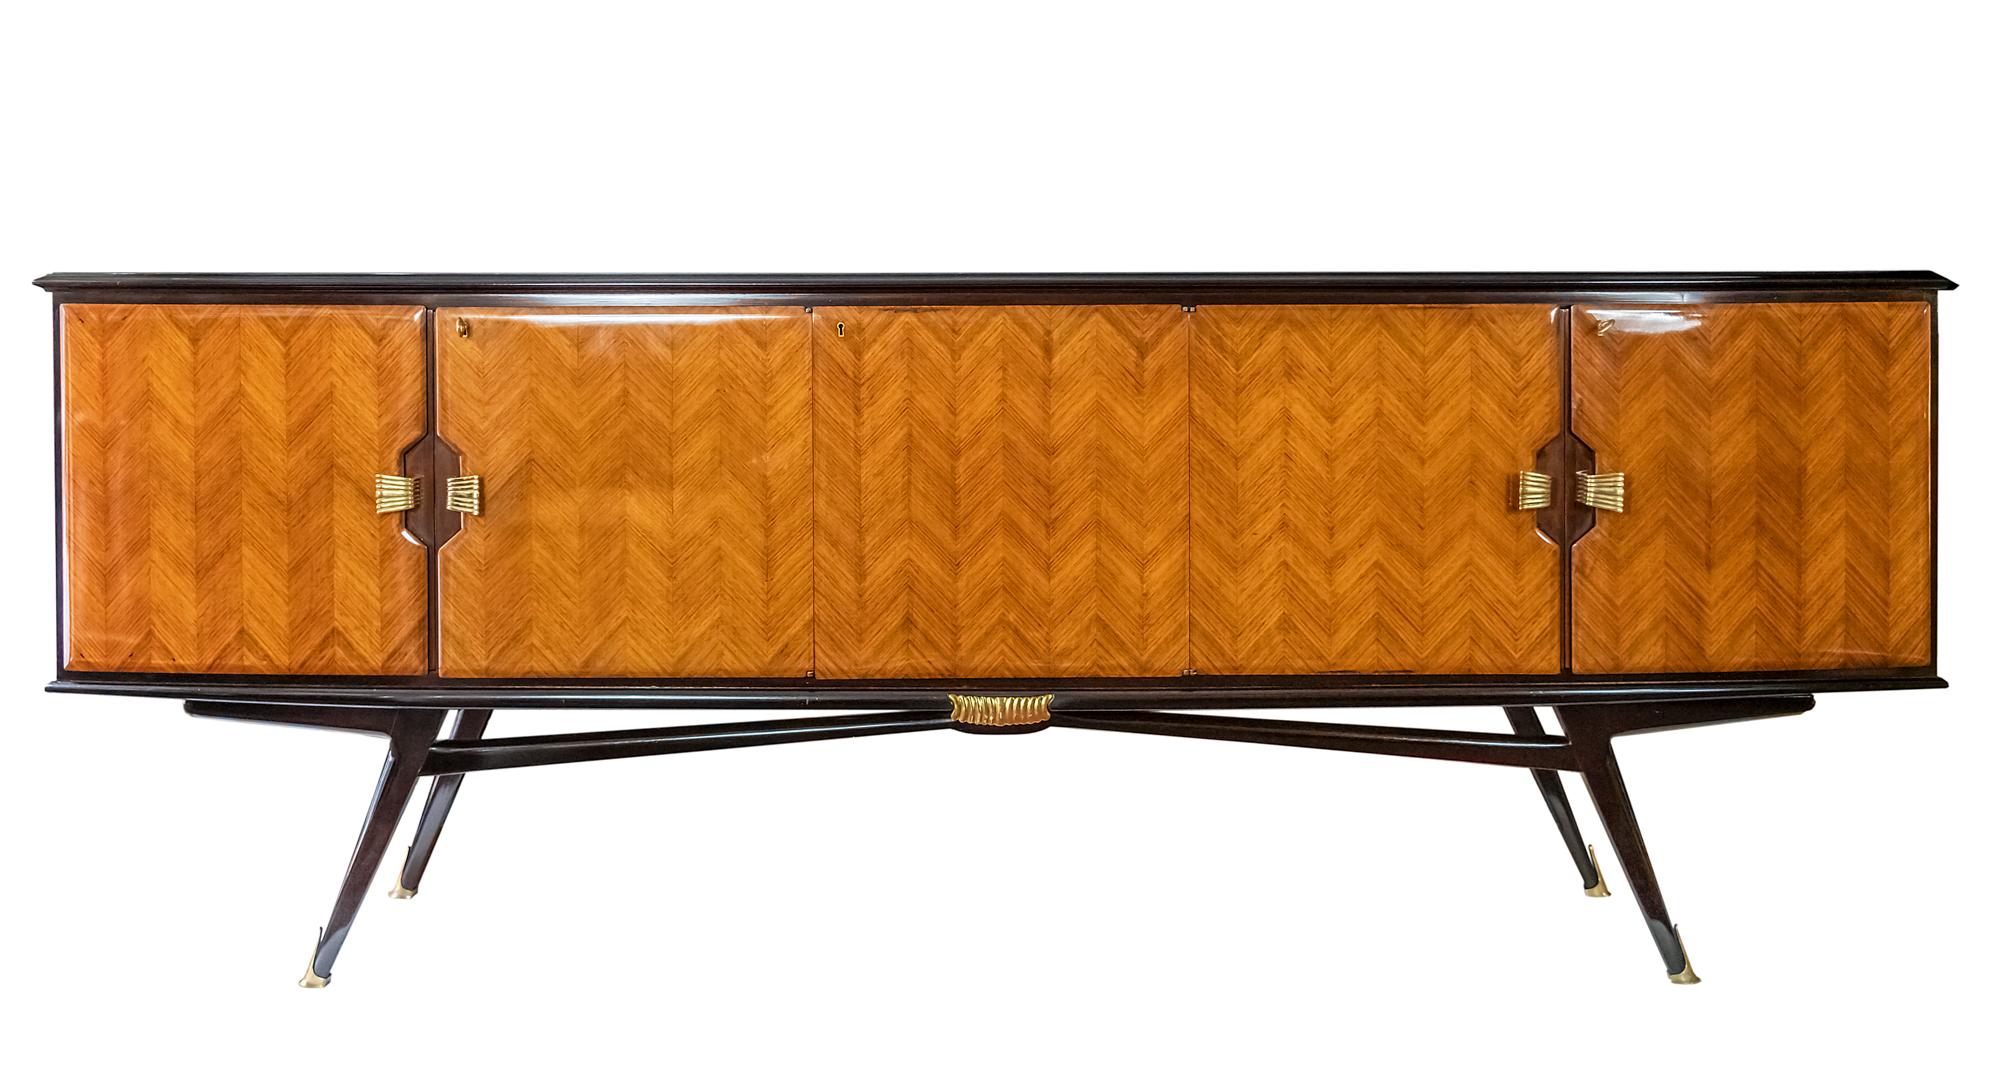 Italian vintage wood veneer sideboard from 1950s in the style of Paolo Buffa or Vittorio Dassi.
Wood surface is varnished, the doors are decorated with brass handles and keys.
Side parts are with shelves inside, the central part inside is for bar